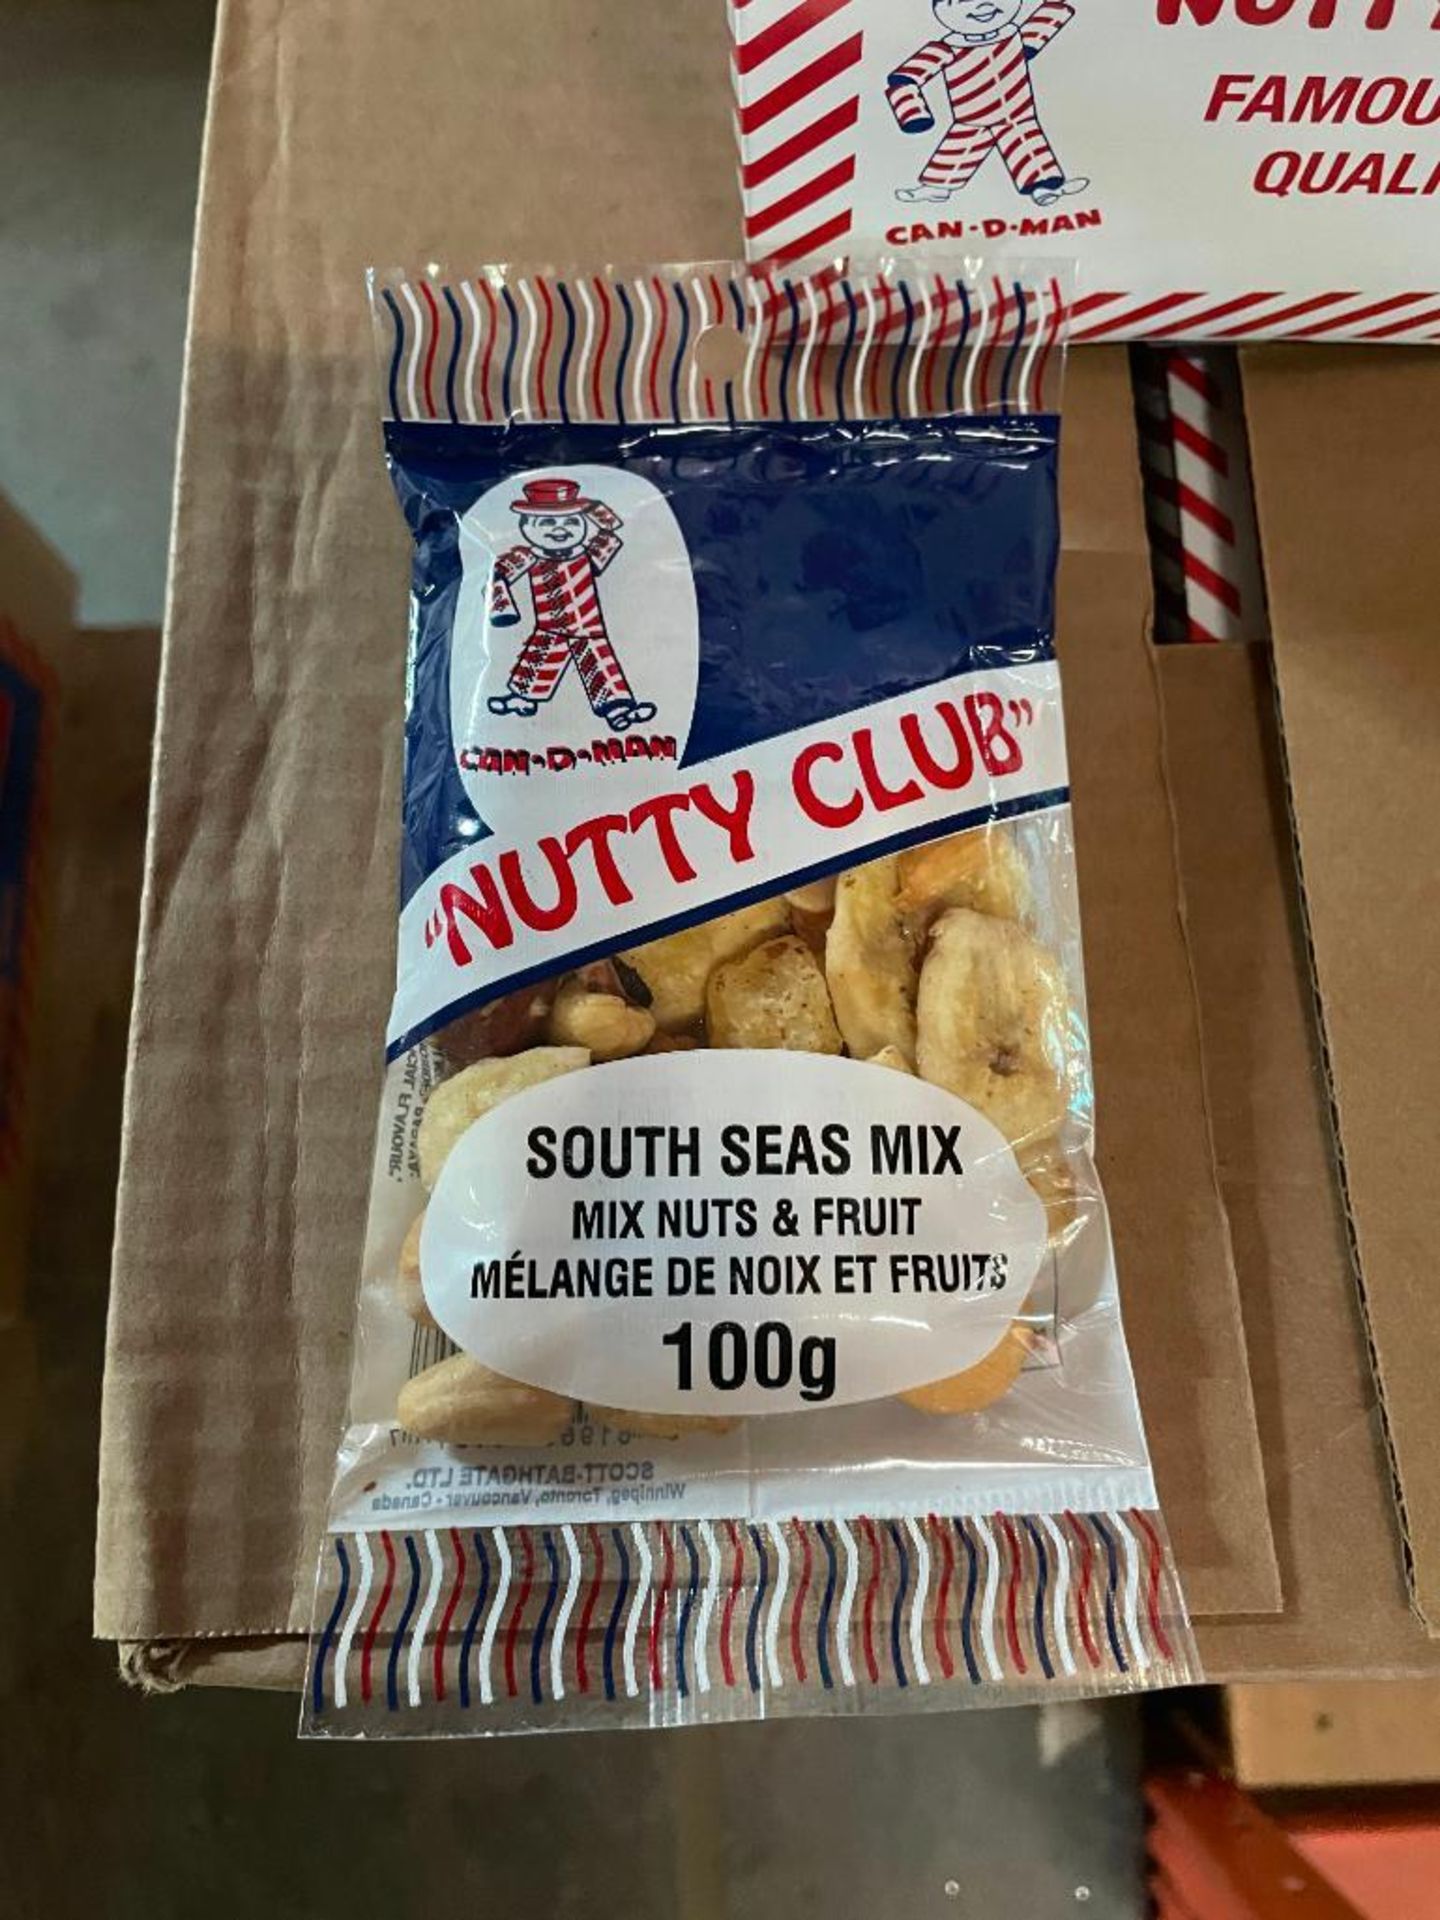 (2) CASES OF NUTTY CLUB SOUTH SEAS MIX, 12/12/100G PER CASE - Image 3 of 3